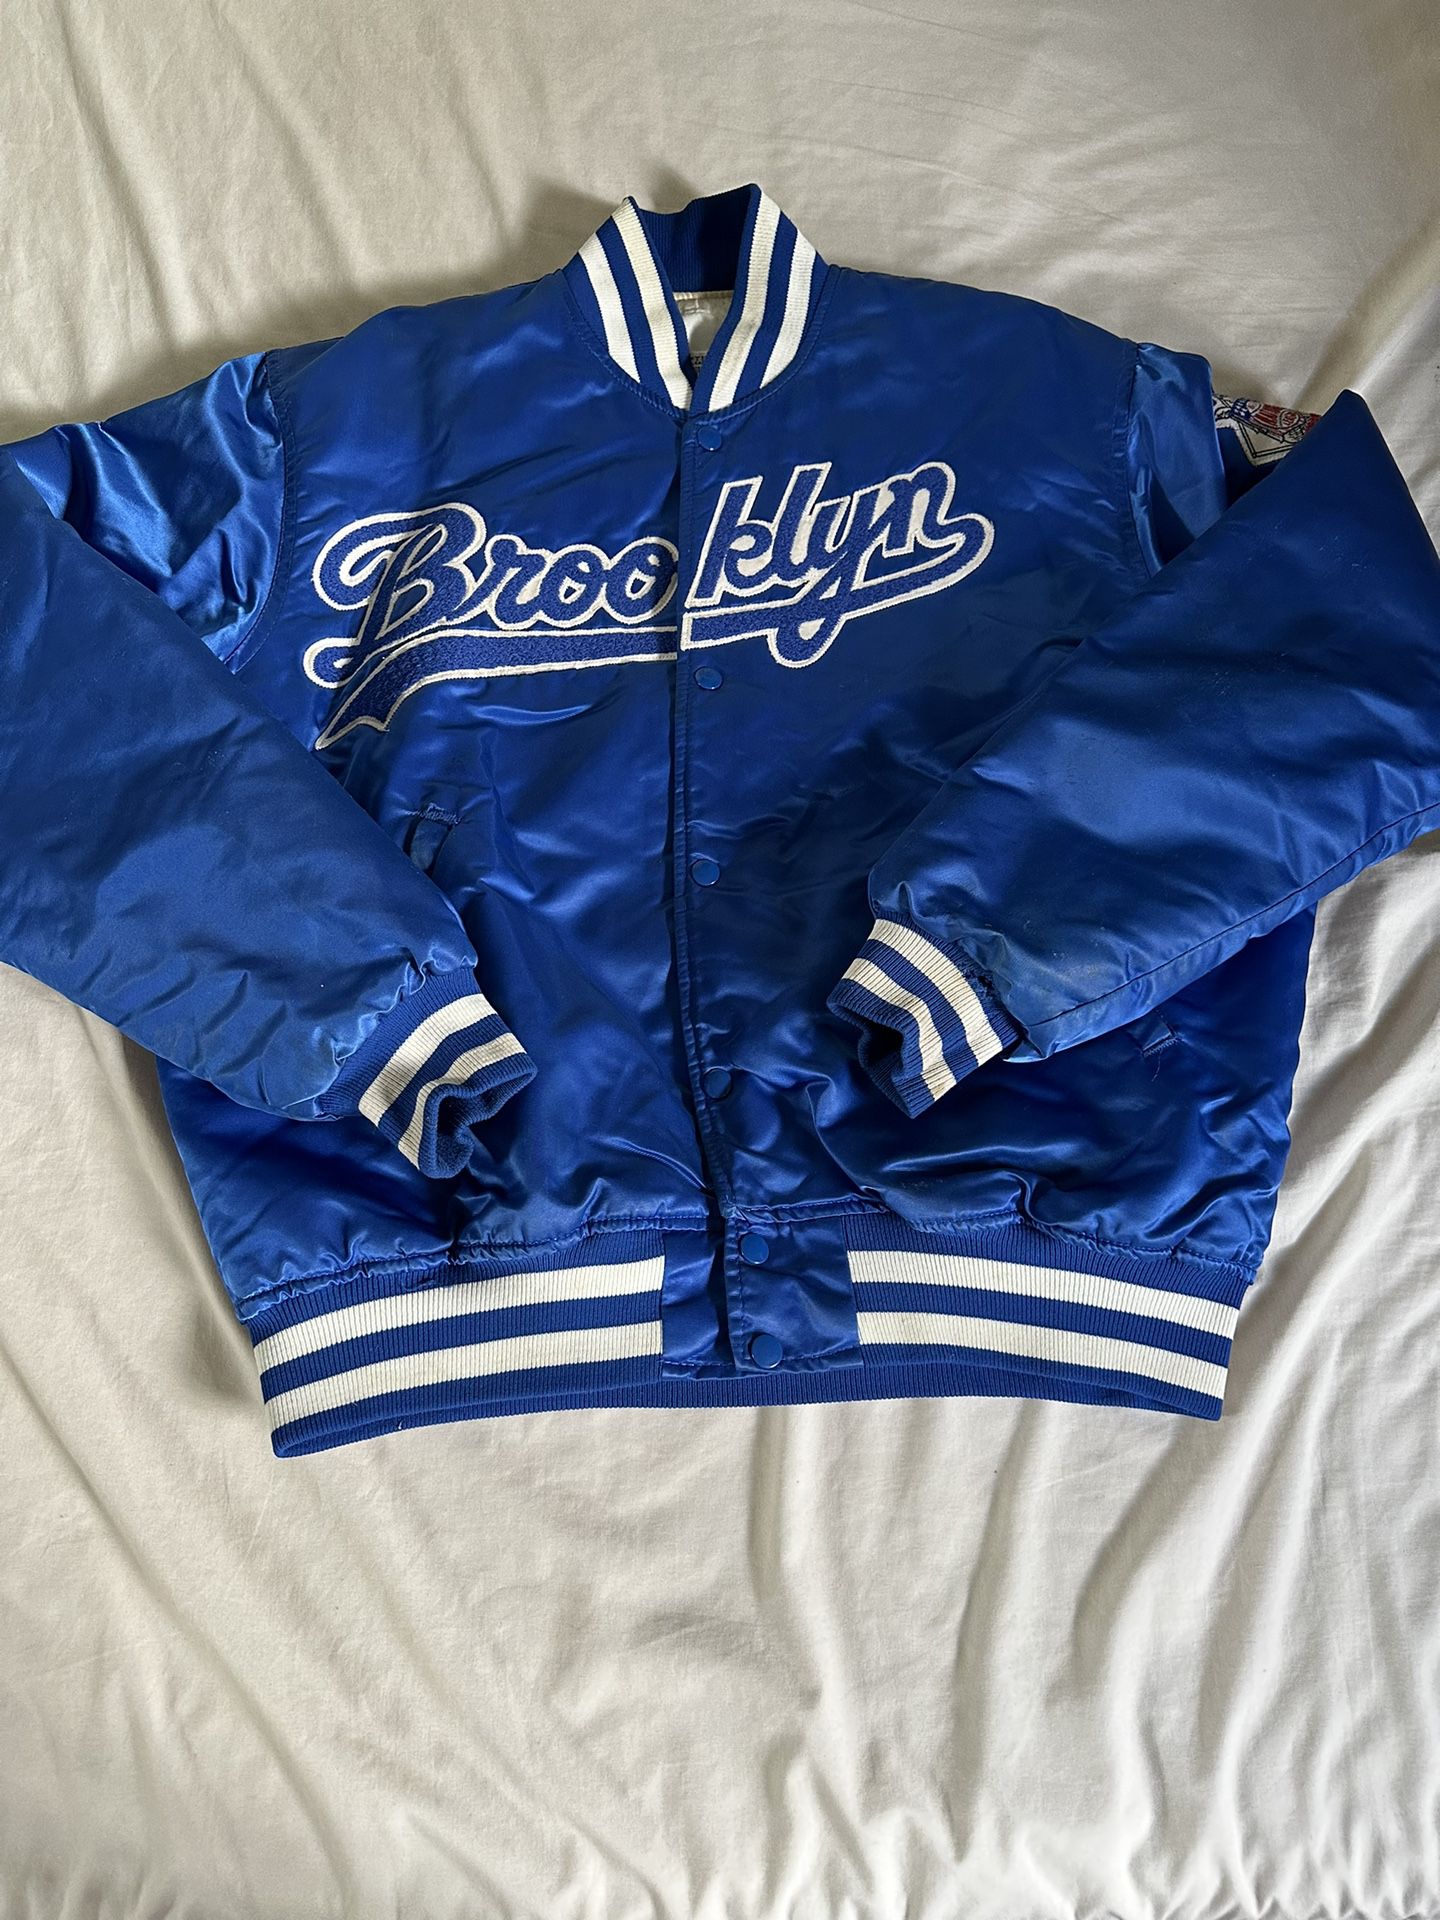 Brooklyn Dodgers Starter Jacket for Sale in South Gate, CA - OfferUp